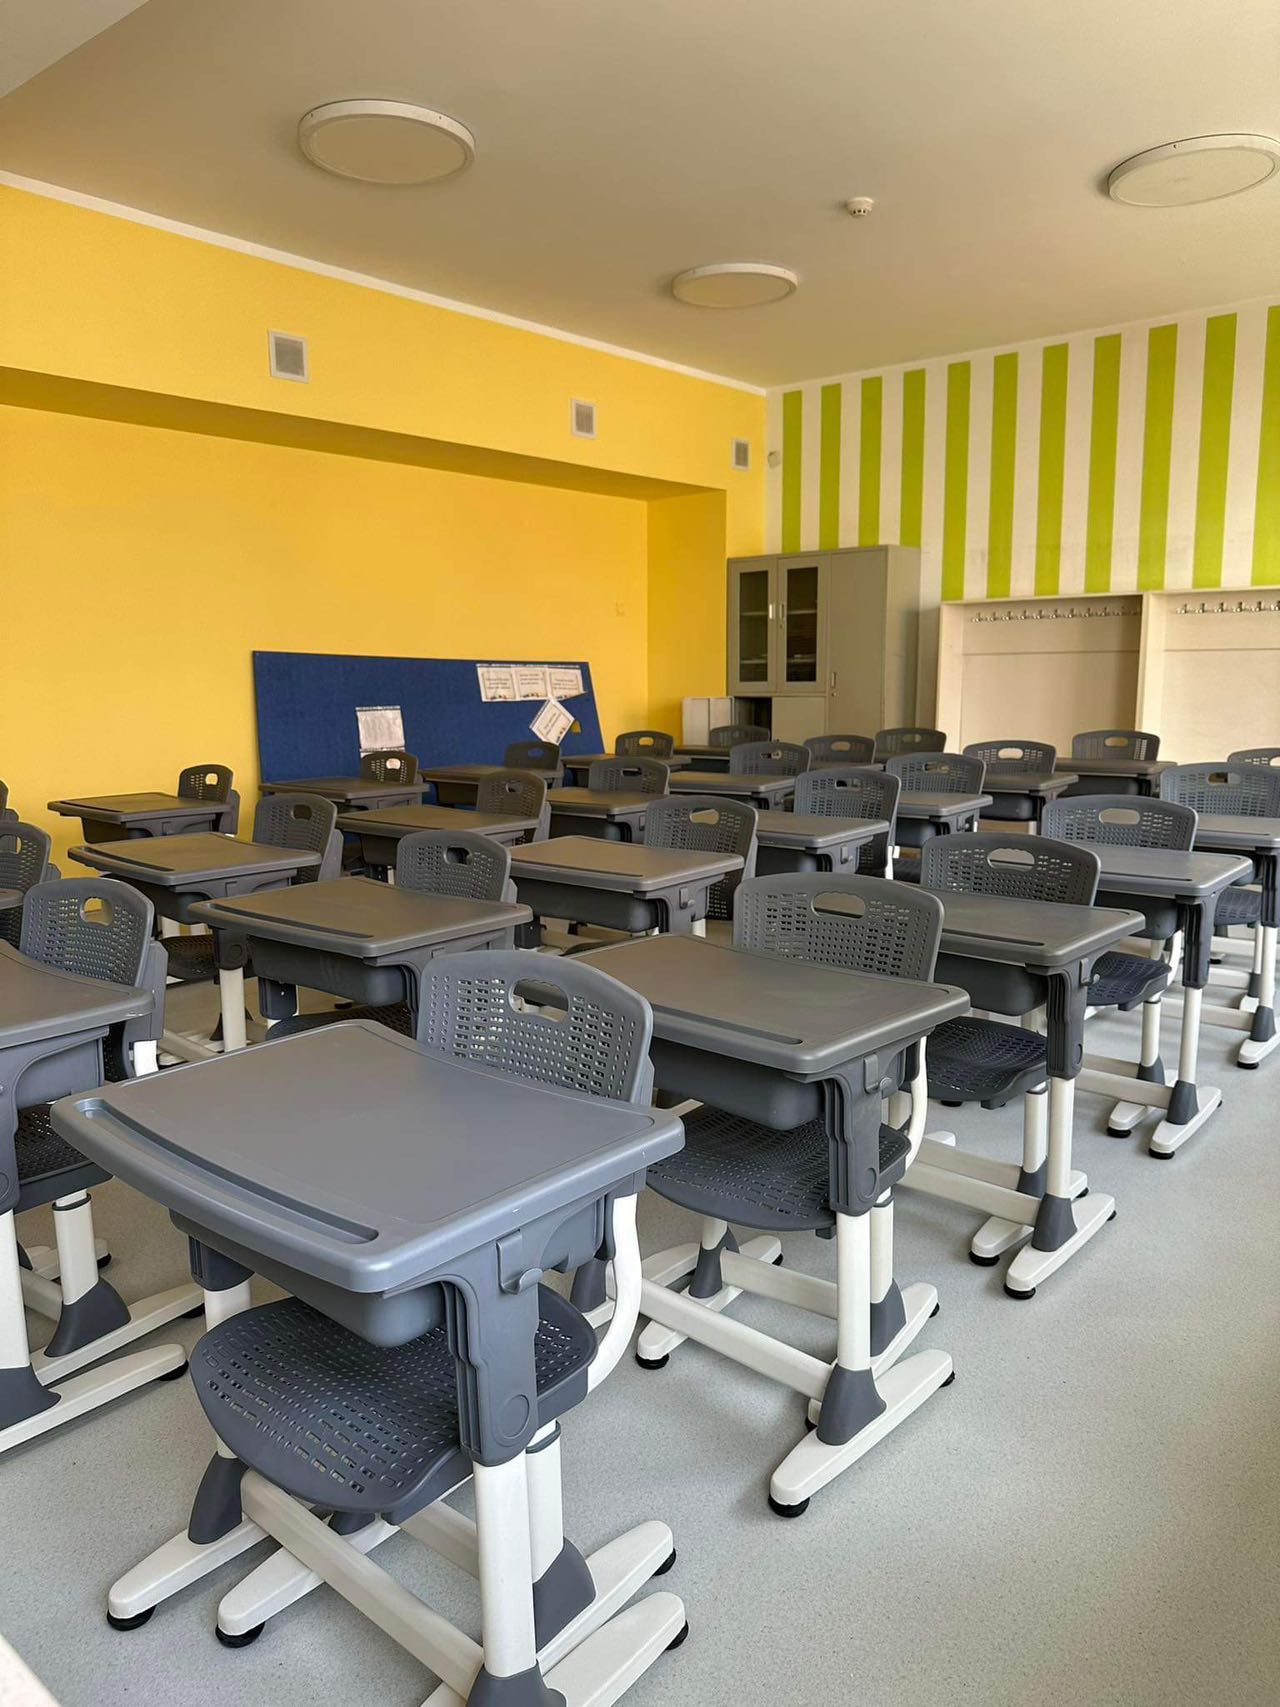 school desks and chairs